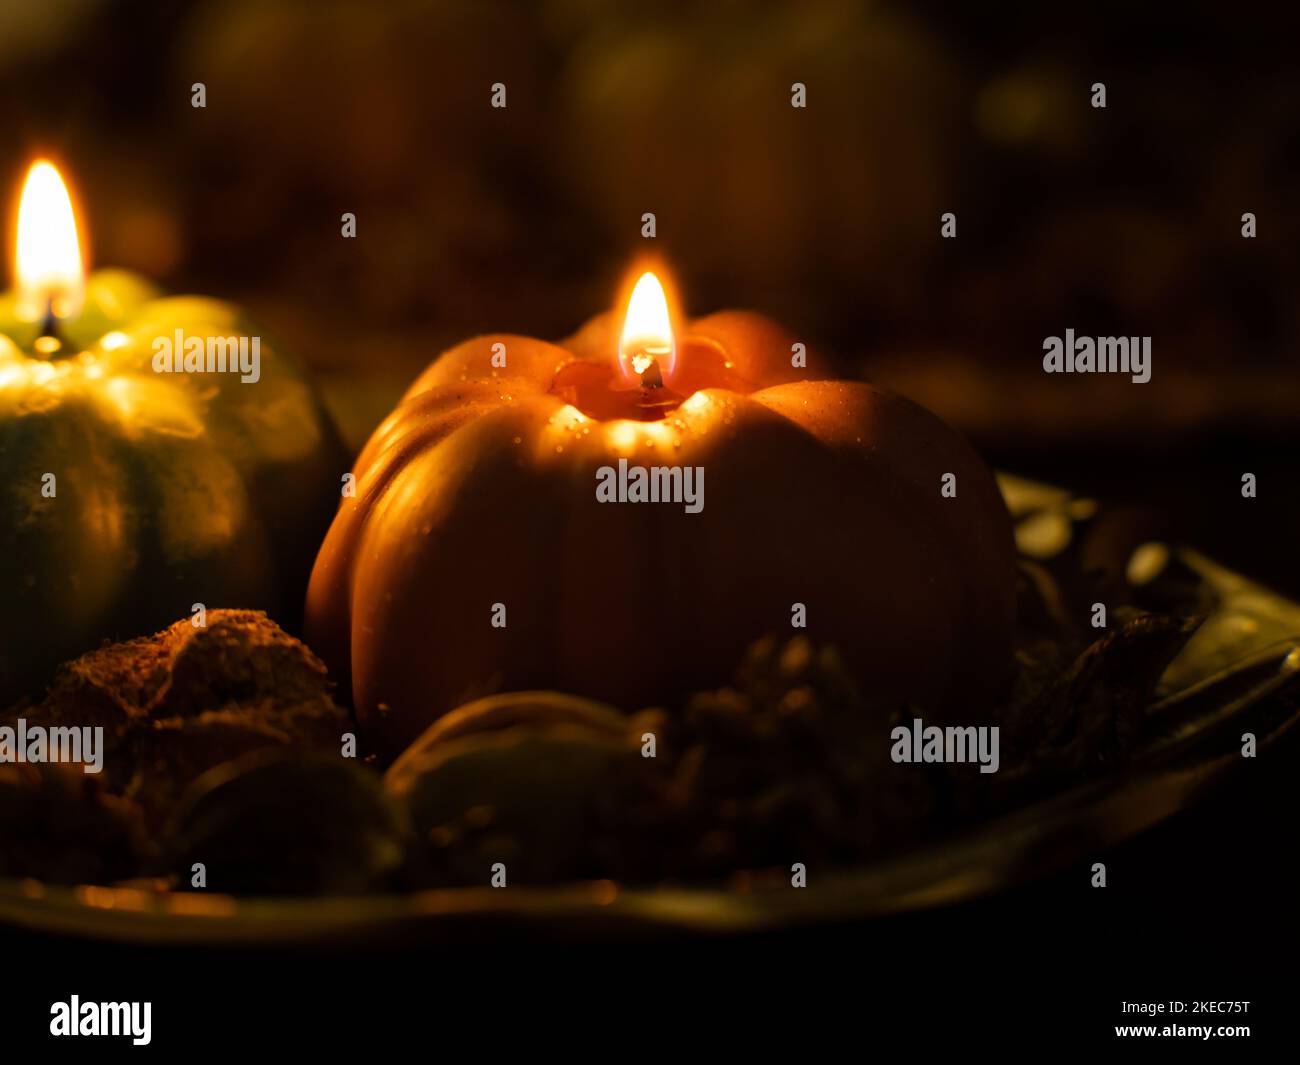 Close-up of a Pumpkin shape candle in a dark setting. Fire is glowing and making a warm atmosphere. Beautiful autumn decoration objects in the room. Stock Photo